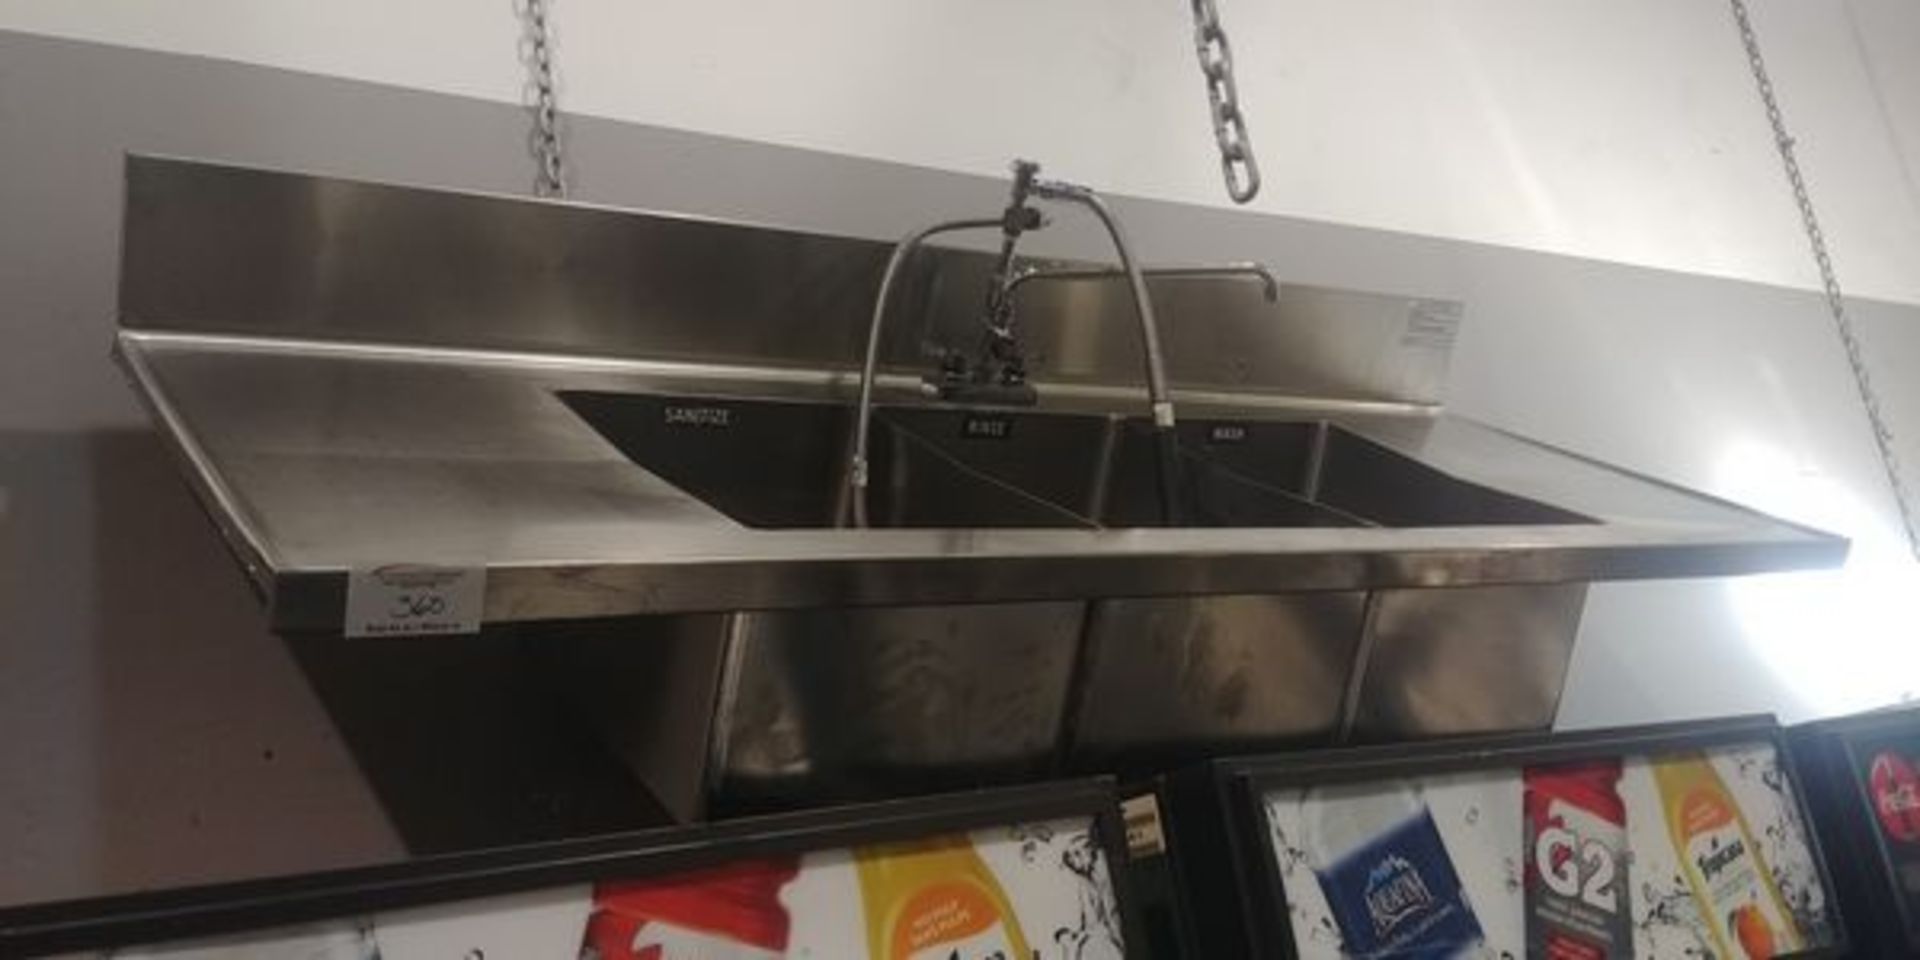 3 Compartment Stainless Steel Drop In Sink with Taps